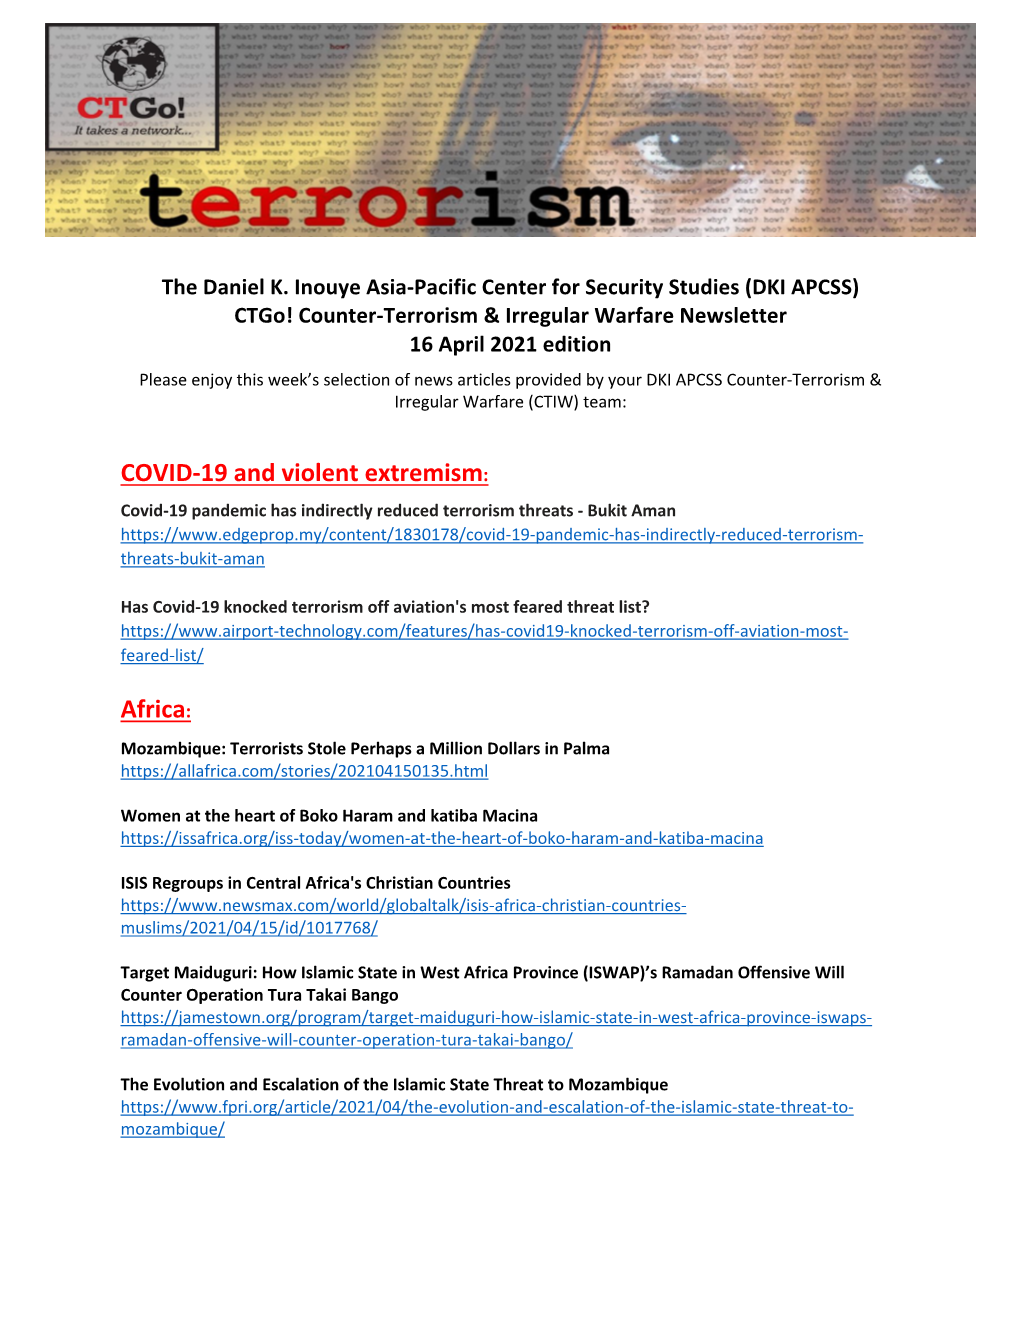 COVID-19 and Violent Extremism